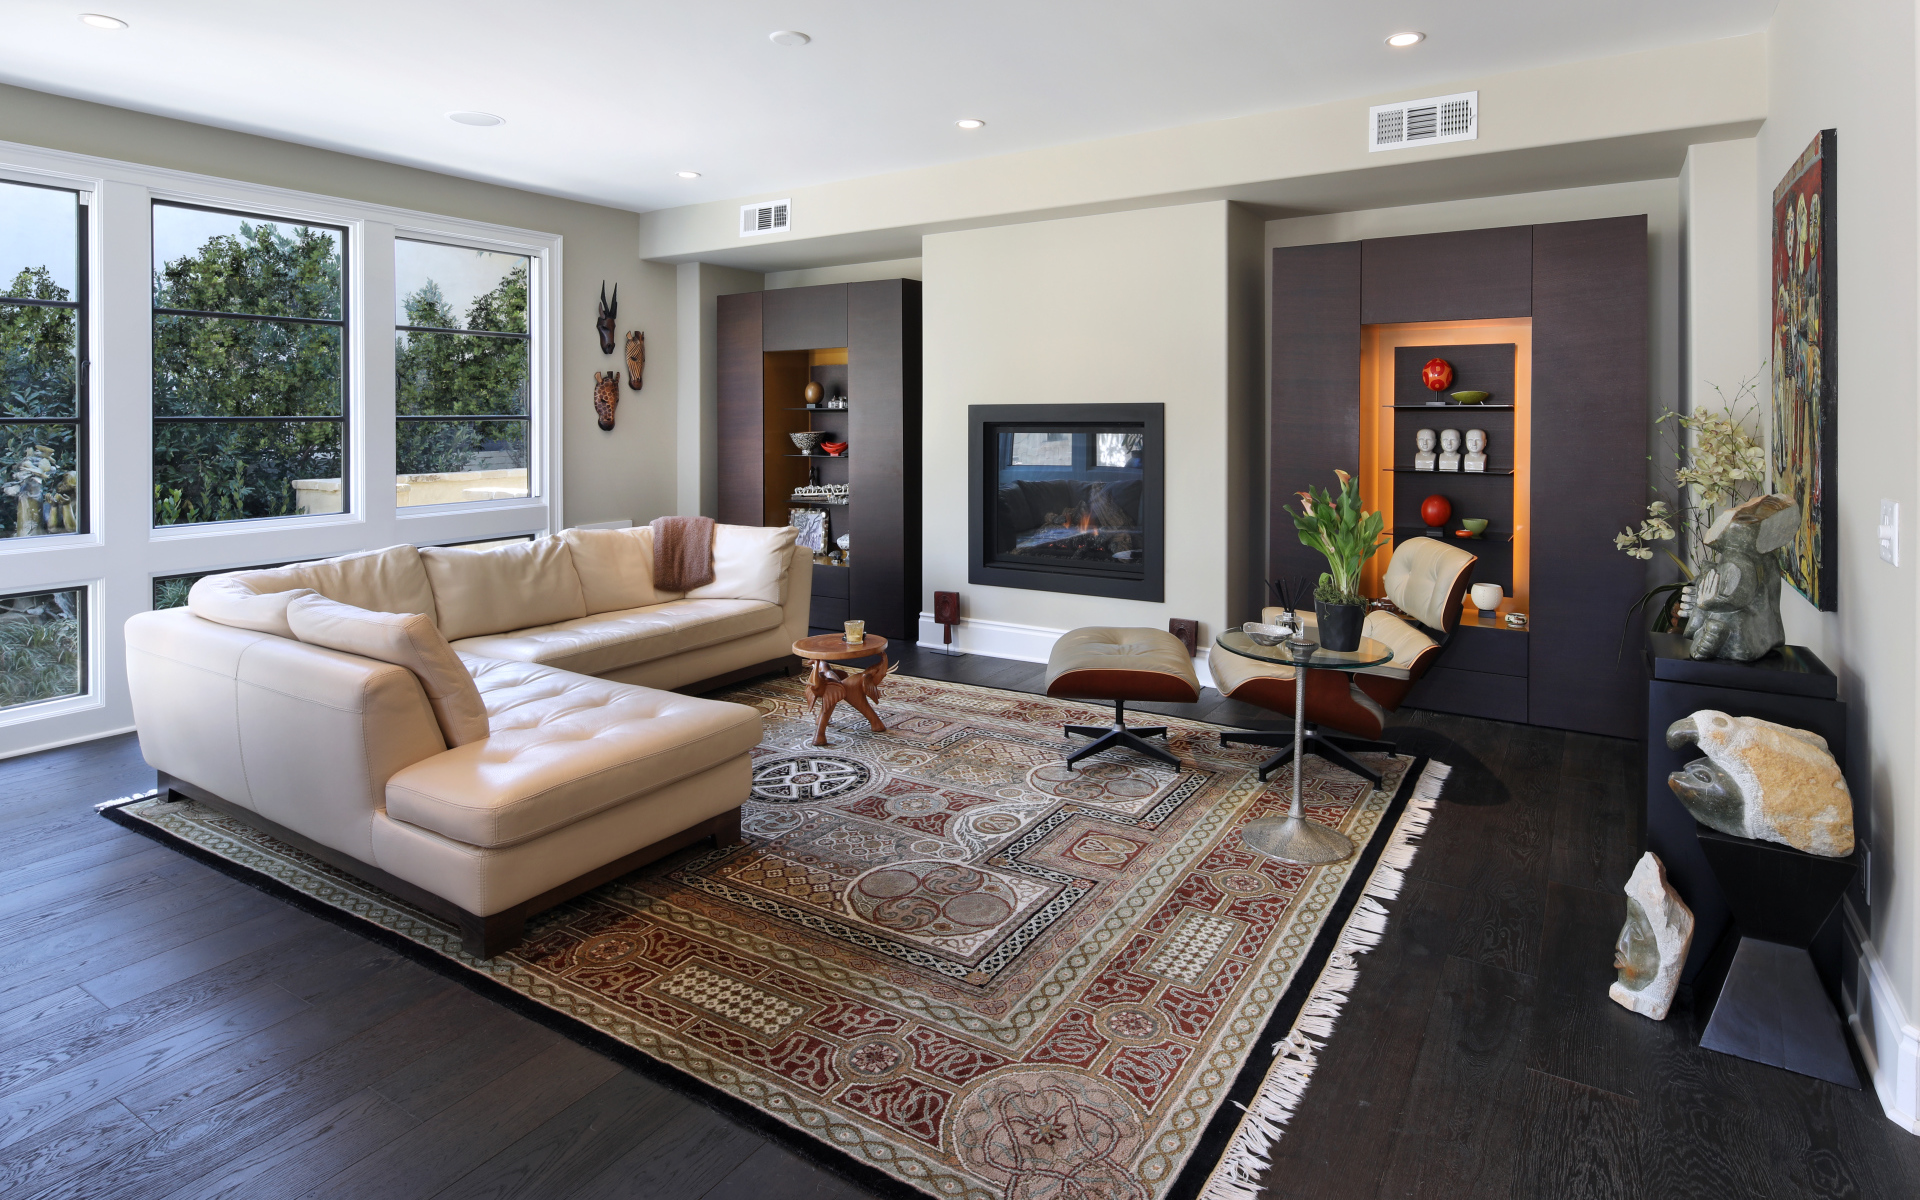 A stylish living room with a white leather sofa and carpet on the floor.